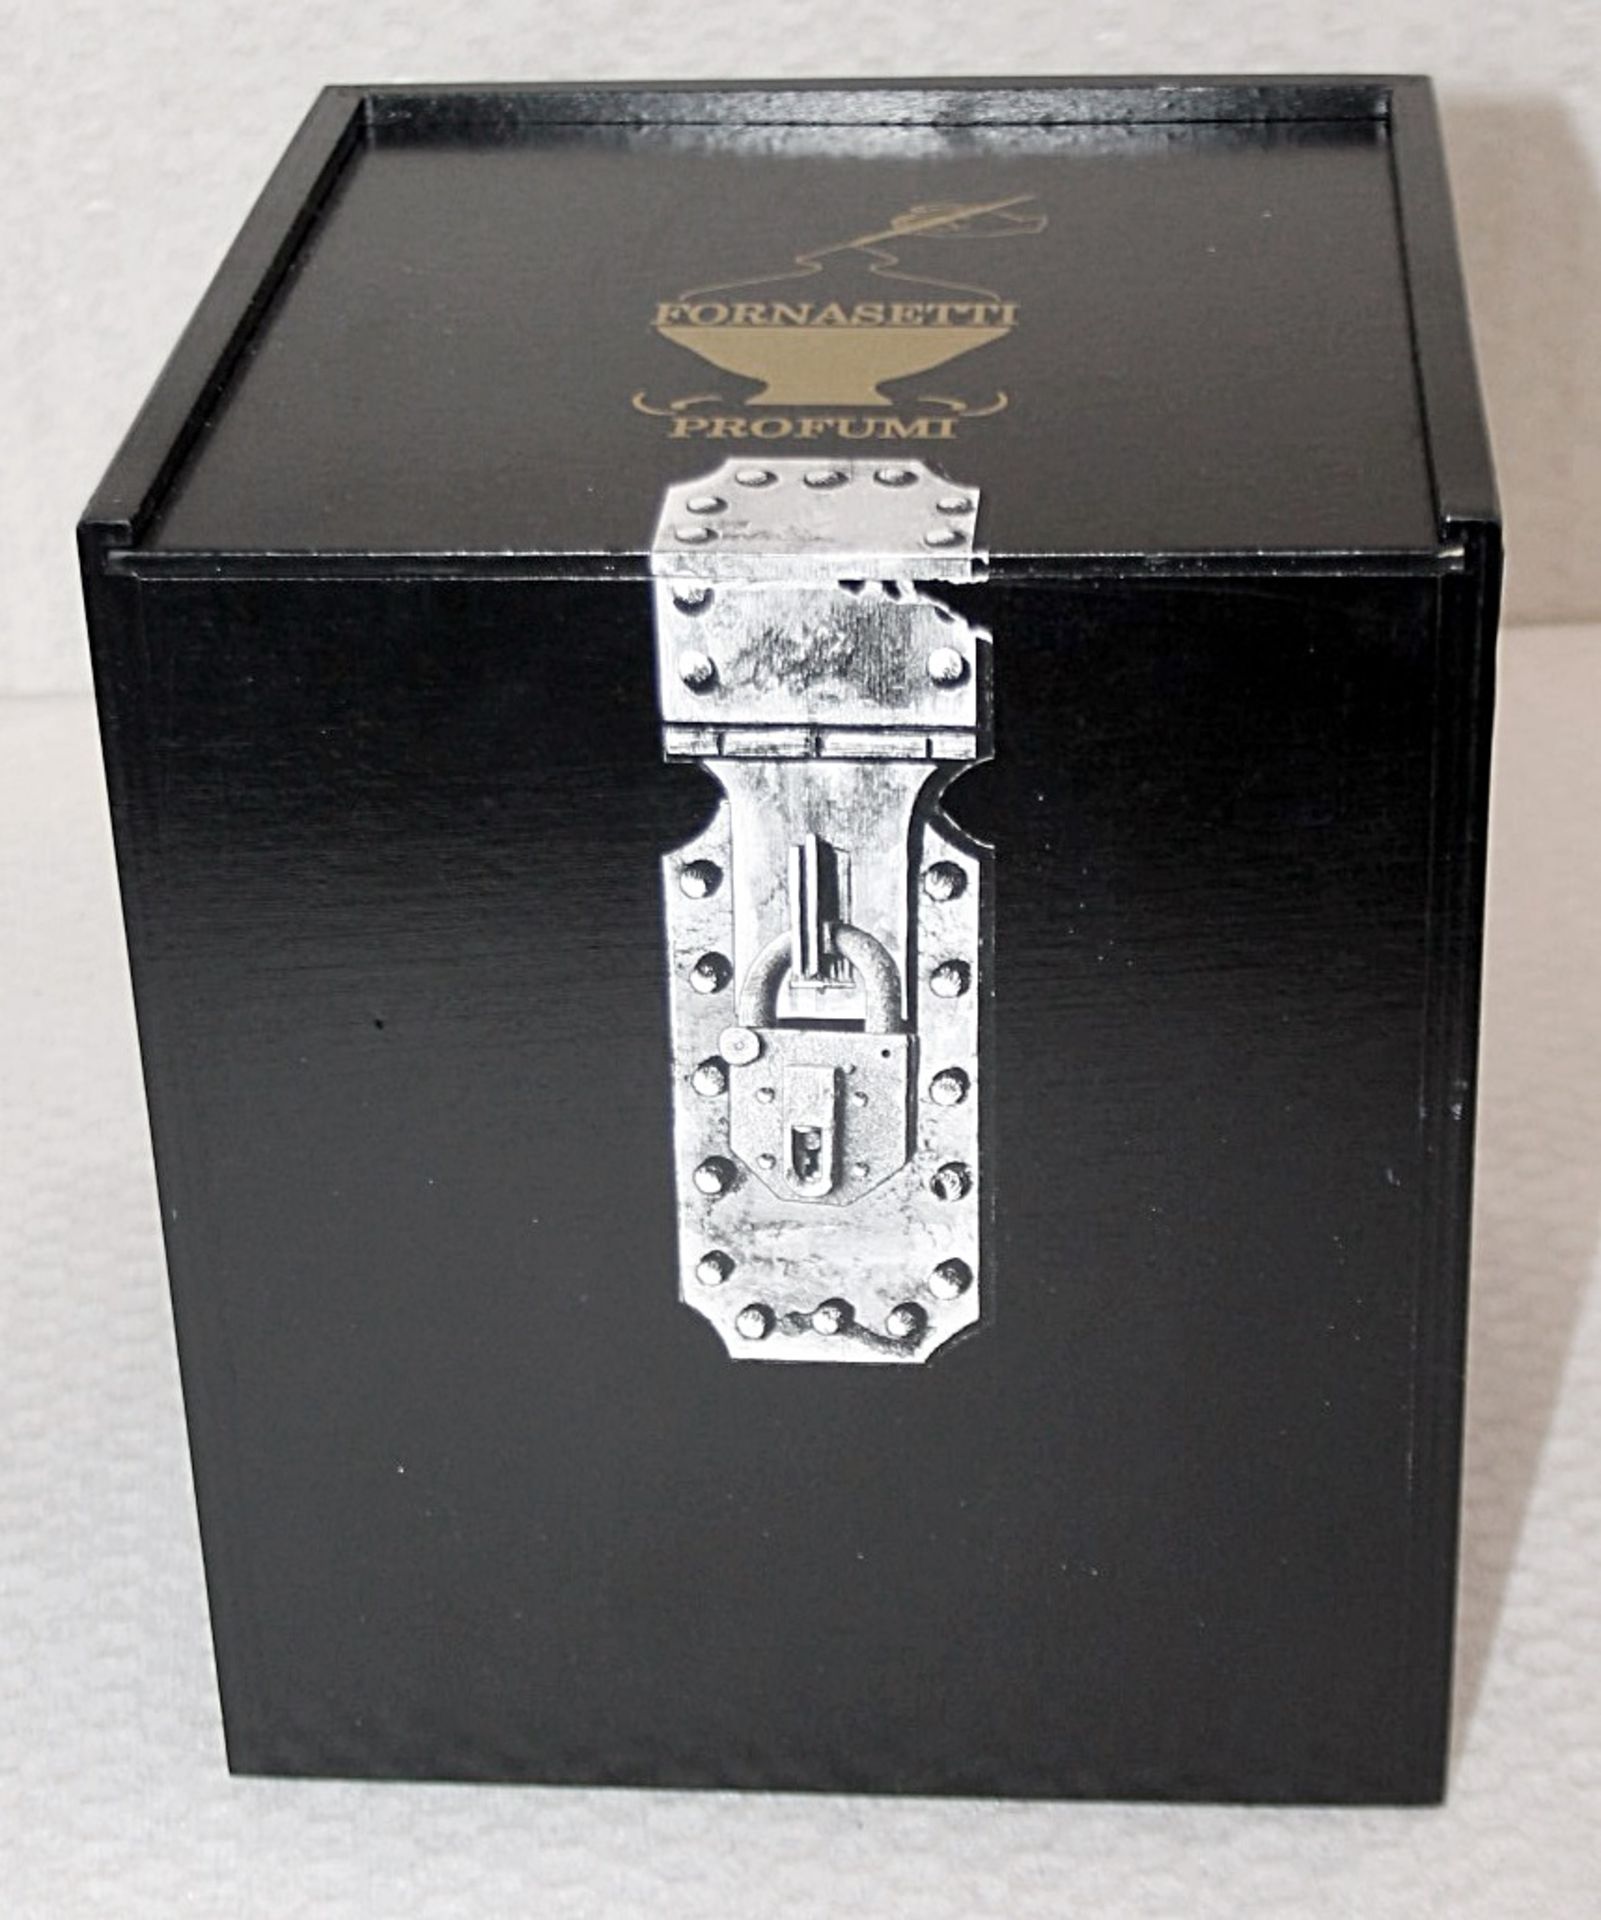 1 x FORNASETTI PROFUMI 'Scimmie' Large 1.9kg Luxury Scented Candle - Original Price £495.00 - Boxed - Image 3 of 9